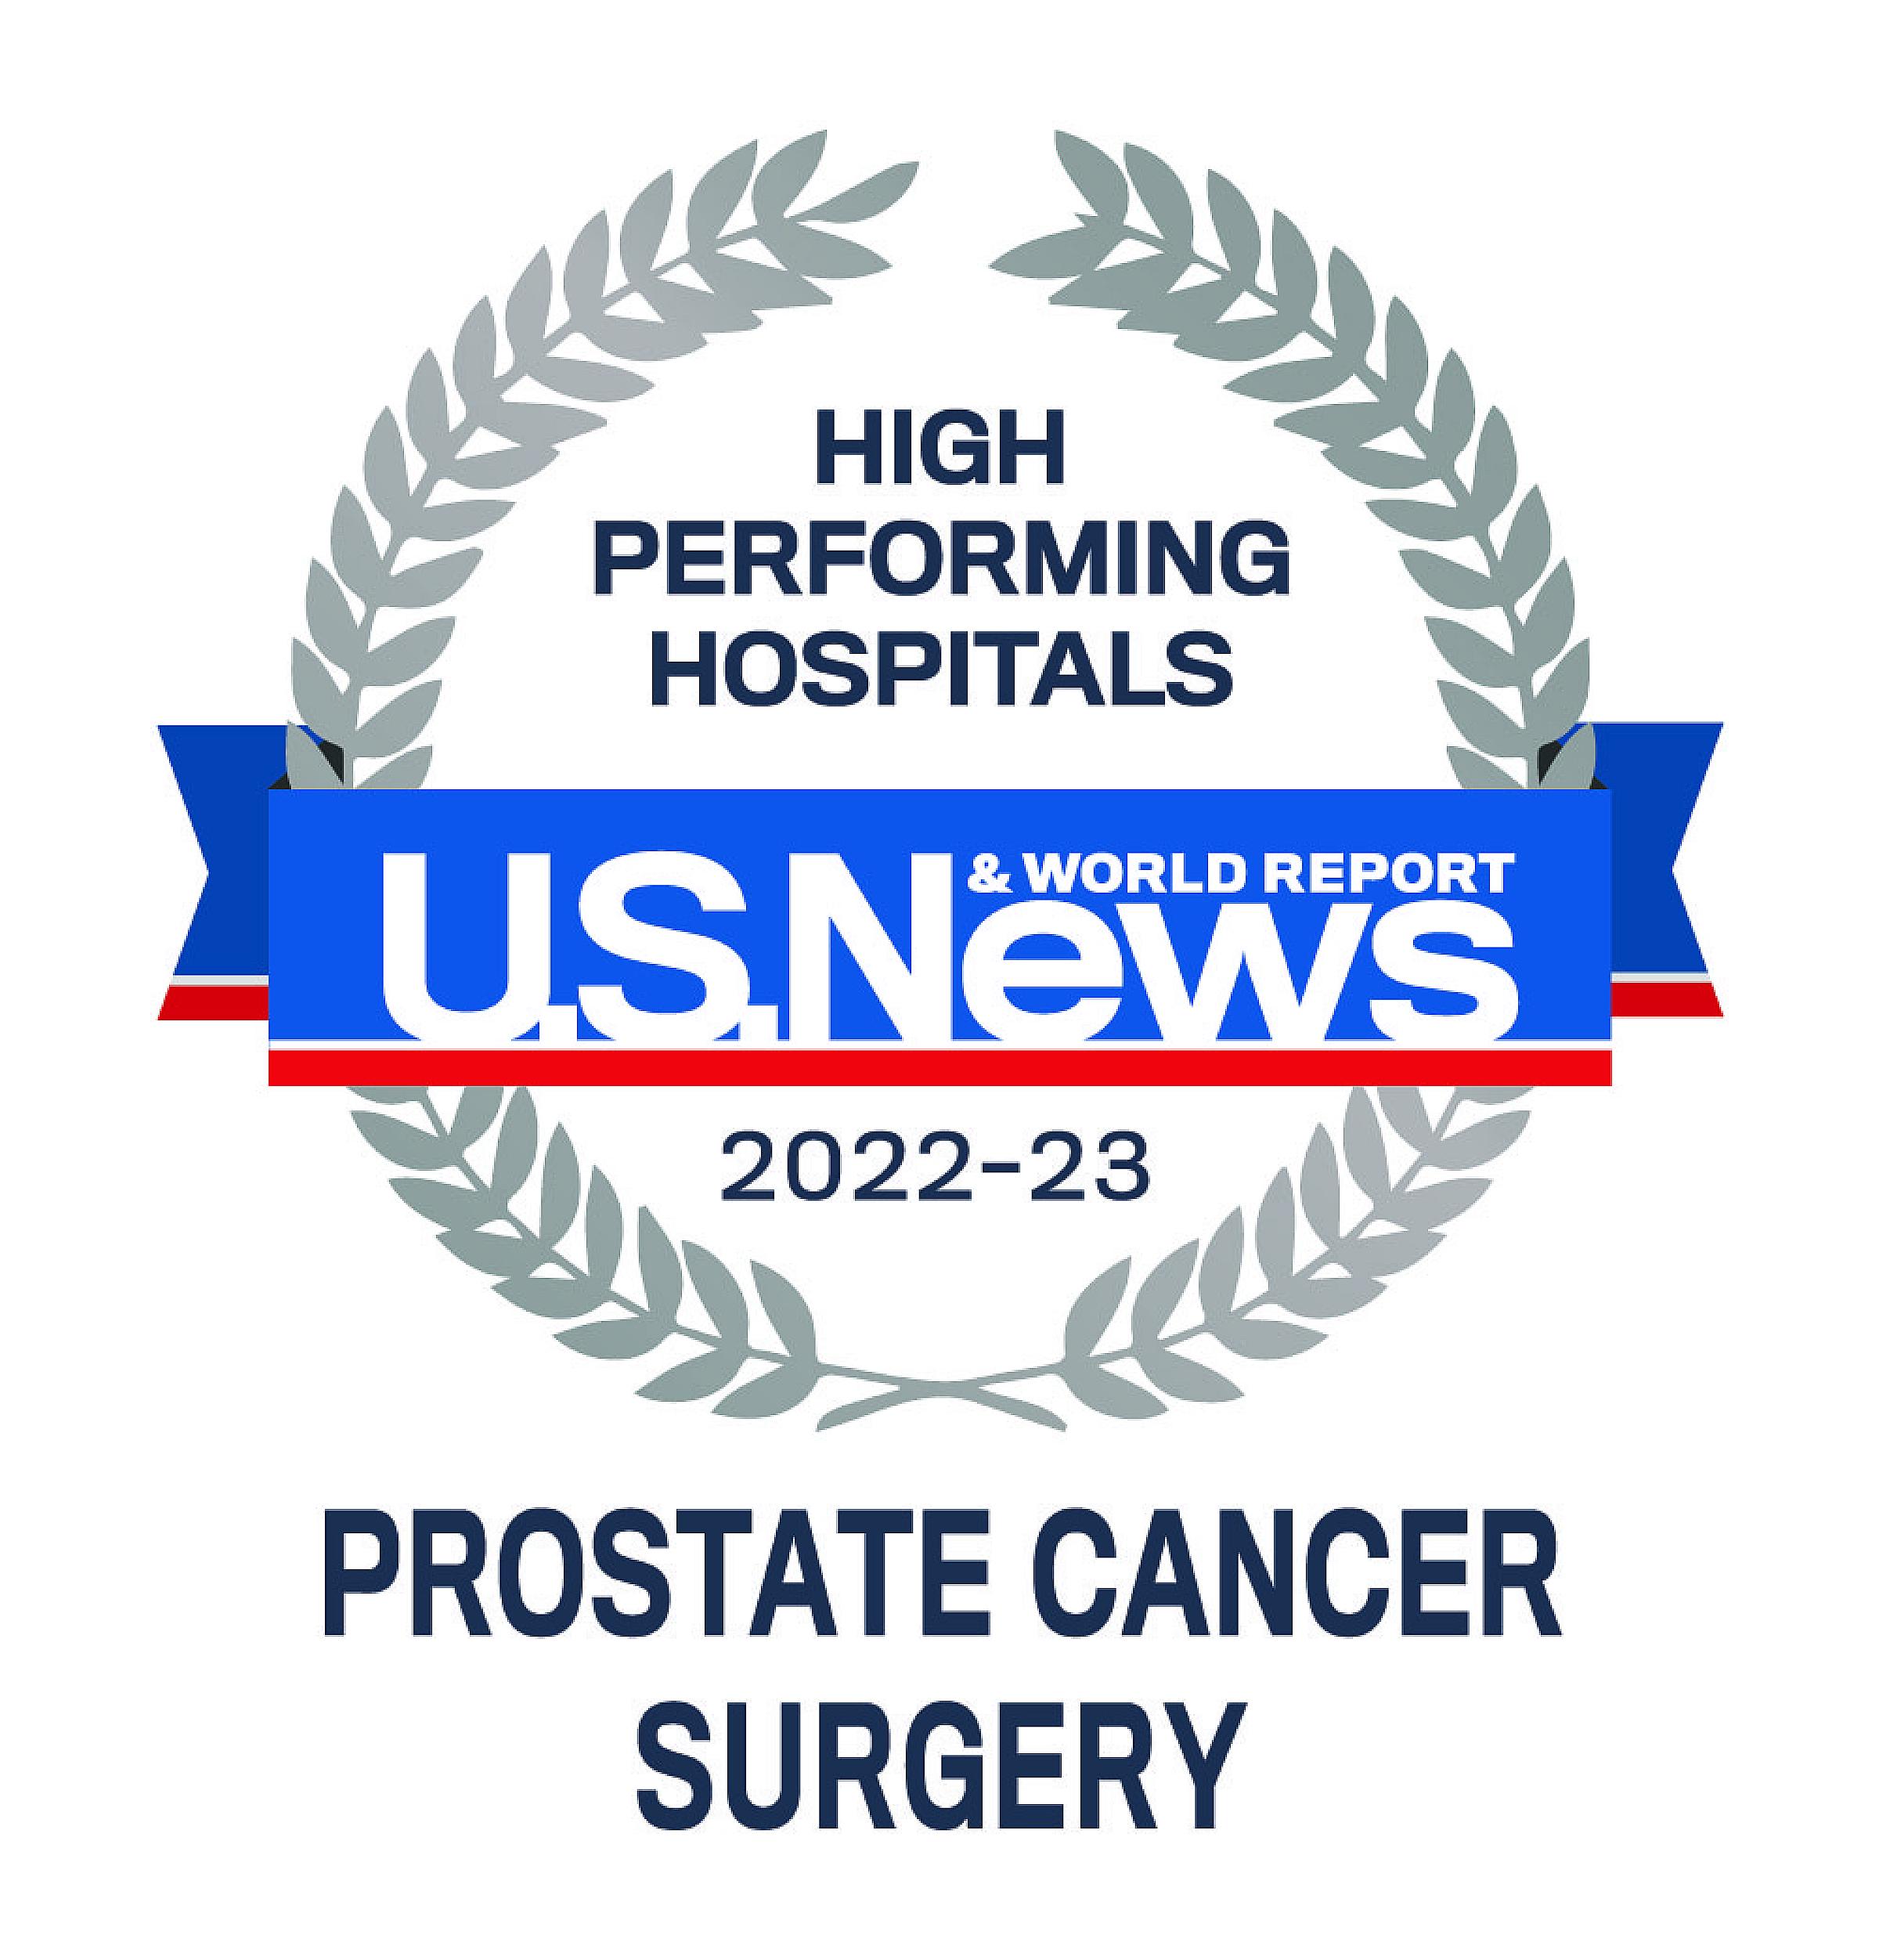 US News 2022-23 High Performing Hospitals Prostate Cancer Surgery Badge